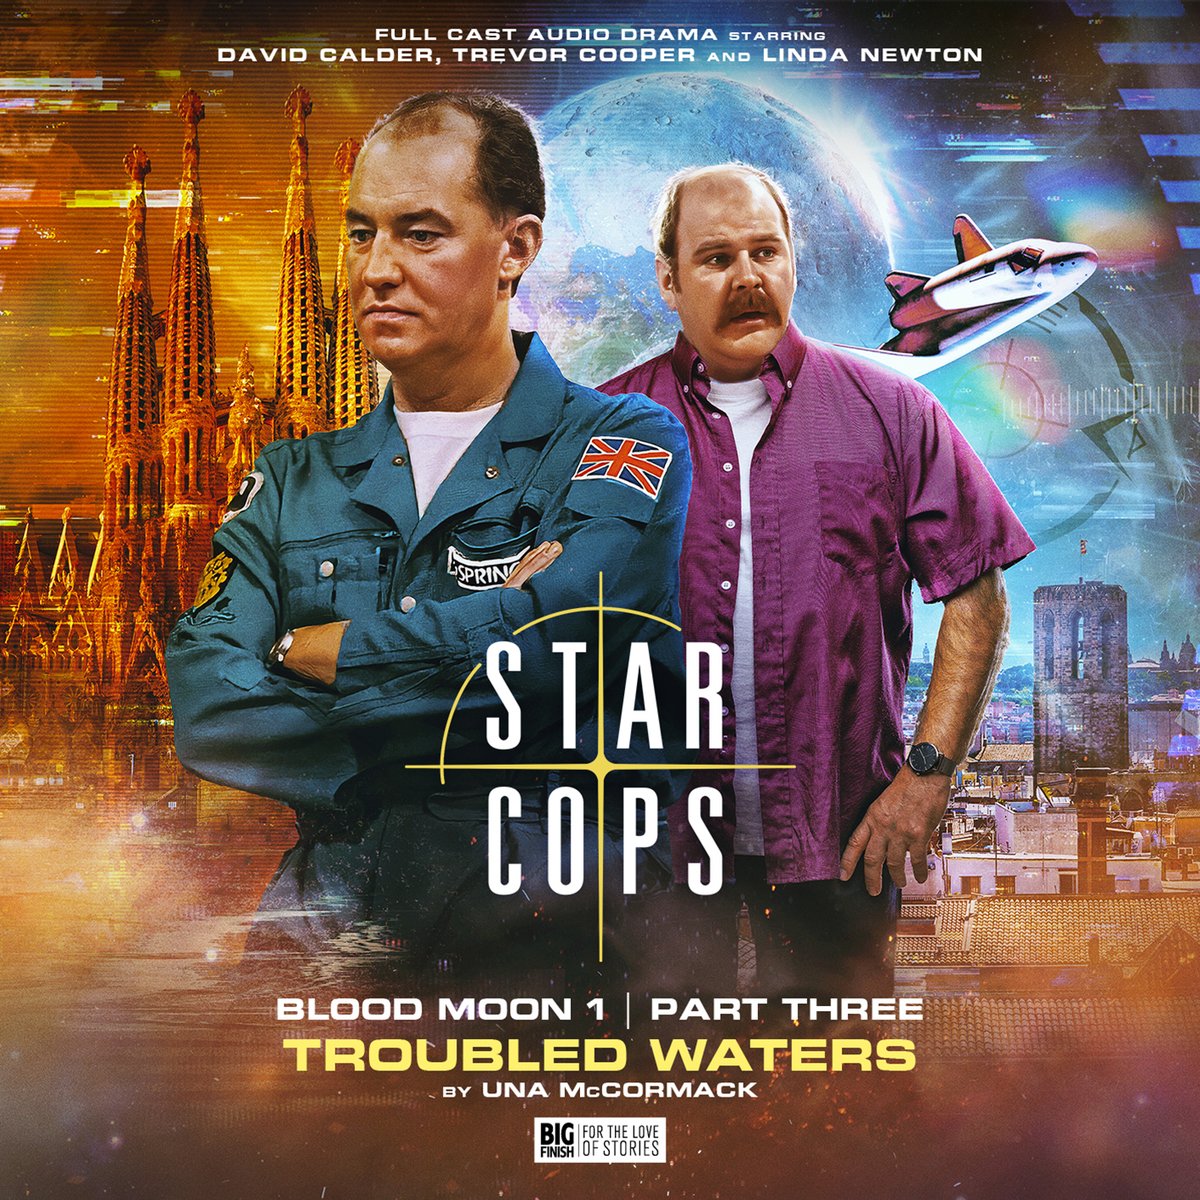 High praise from @AlasdairStuart for @unamccormack's new Star Cops tale @Andr3wSmith @bigfinish @HelenGoldwyn scifibulletin.com/uk-tv/star-cop…